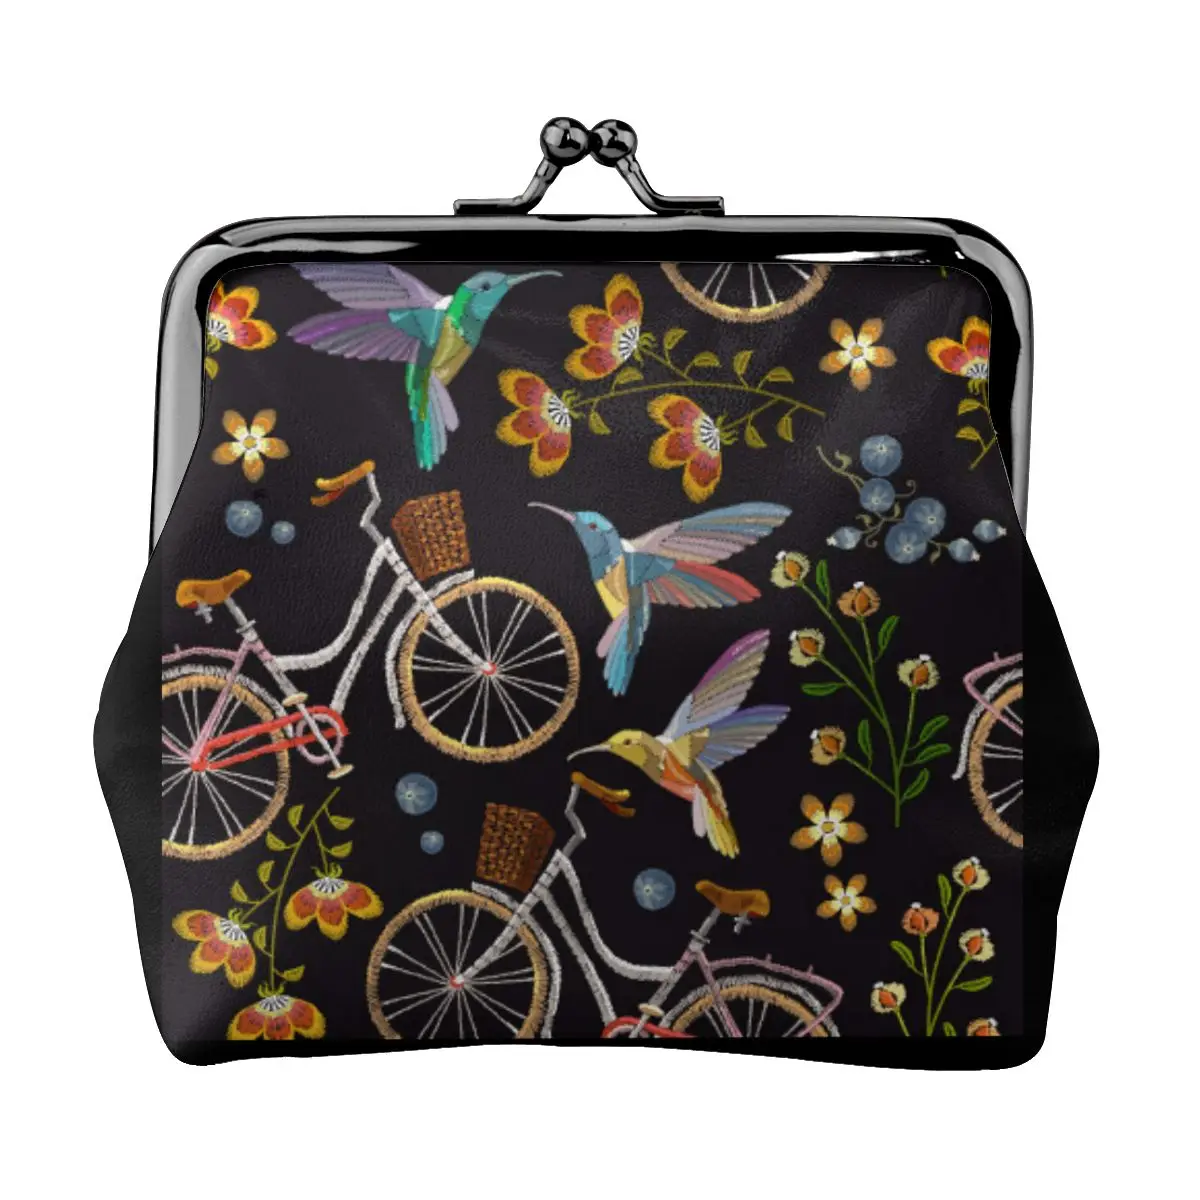 Small Wallet Women Mini Printing Coin Purses Hasp Cash Card Handbags Clutch Money Change Bag Bicycle umming Bird And Flowers